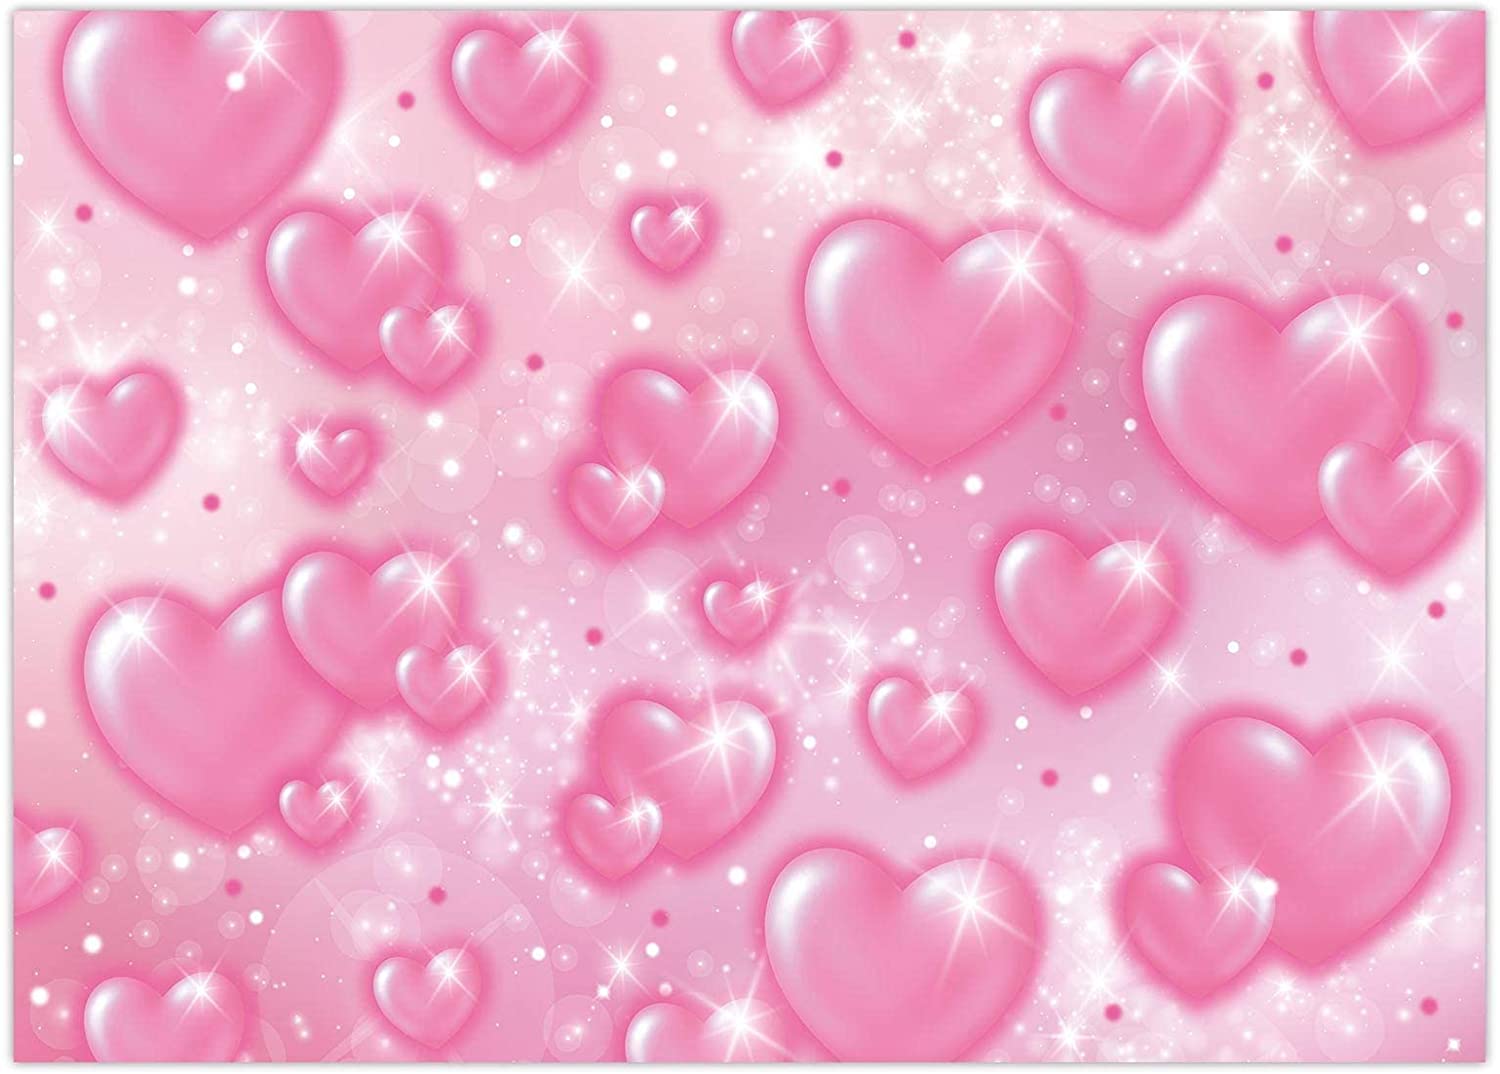 Amazon.com, Funnytree 7x5FT Early 2000s Photography Backdrop Pink Hearts Romantic Valentines Day Background Baby Shower Birthday Girl Party Banner Decor Supplies Portrait Props Photobooth Gift Newborn